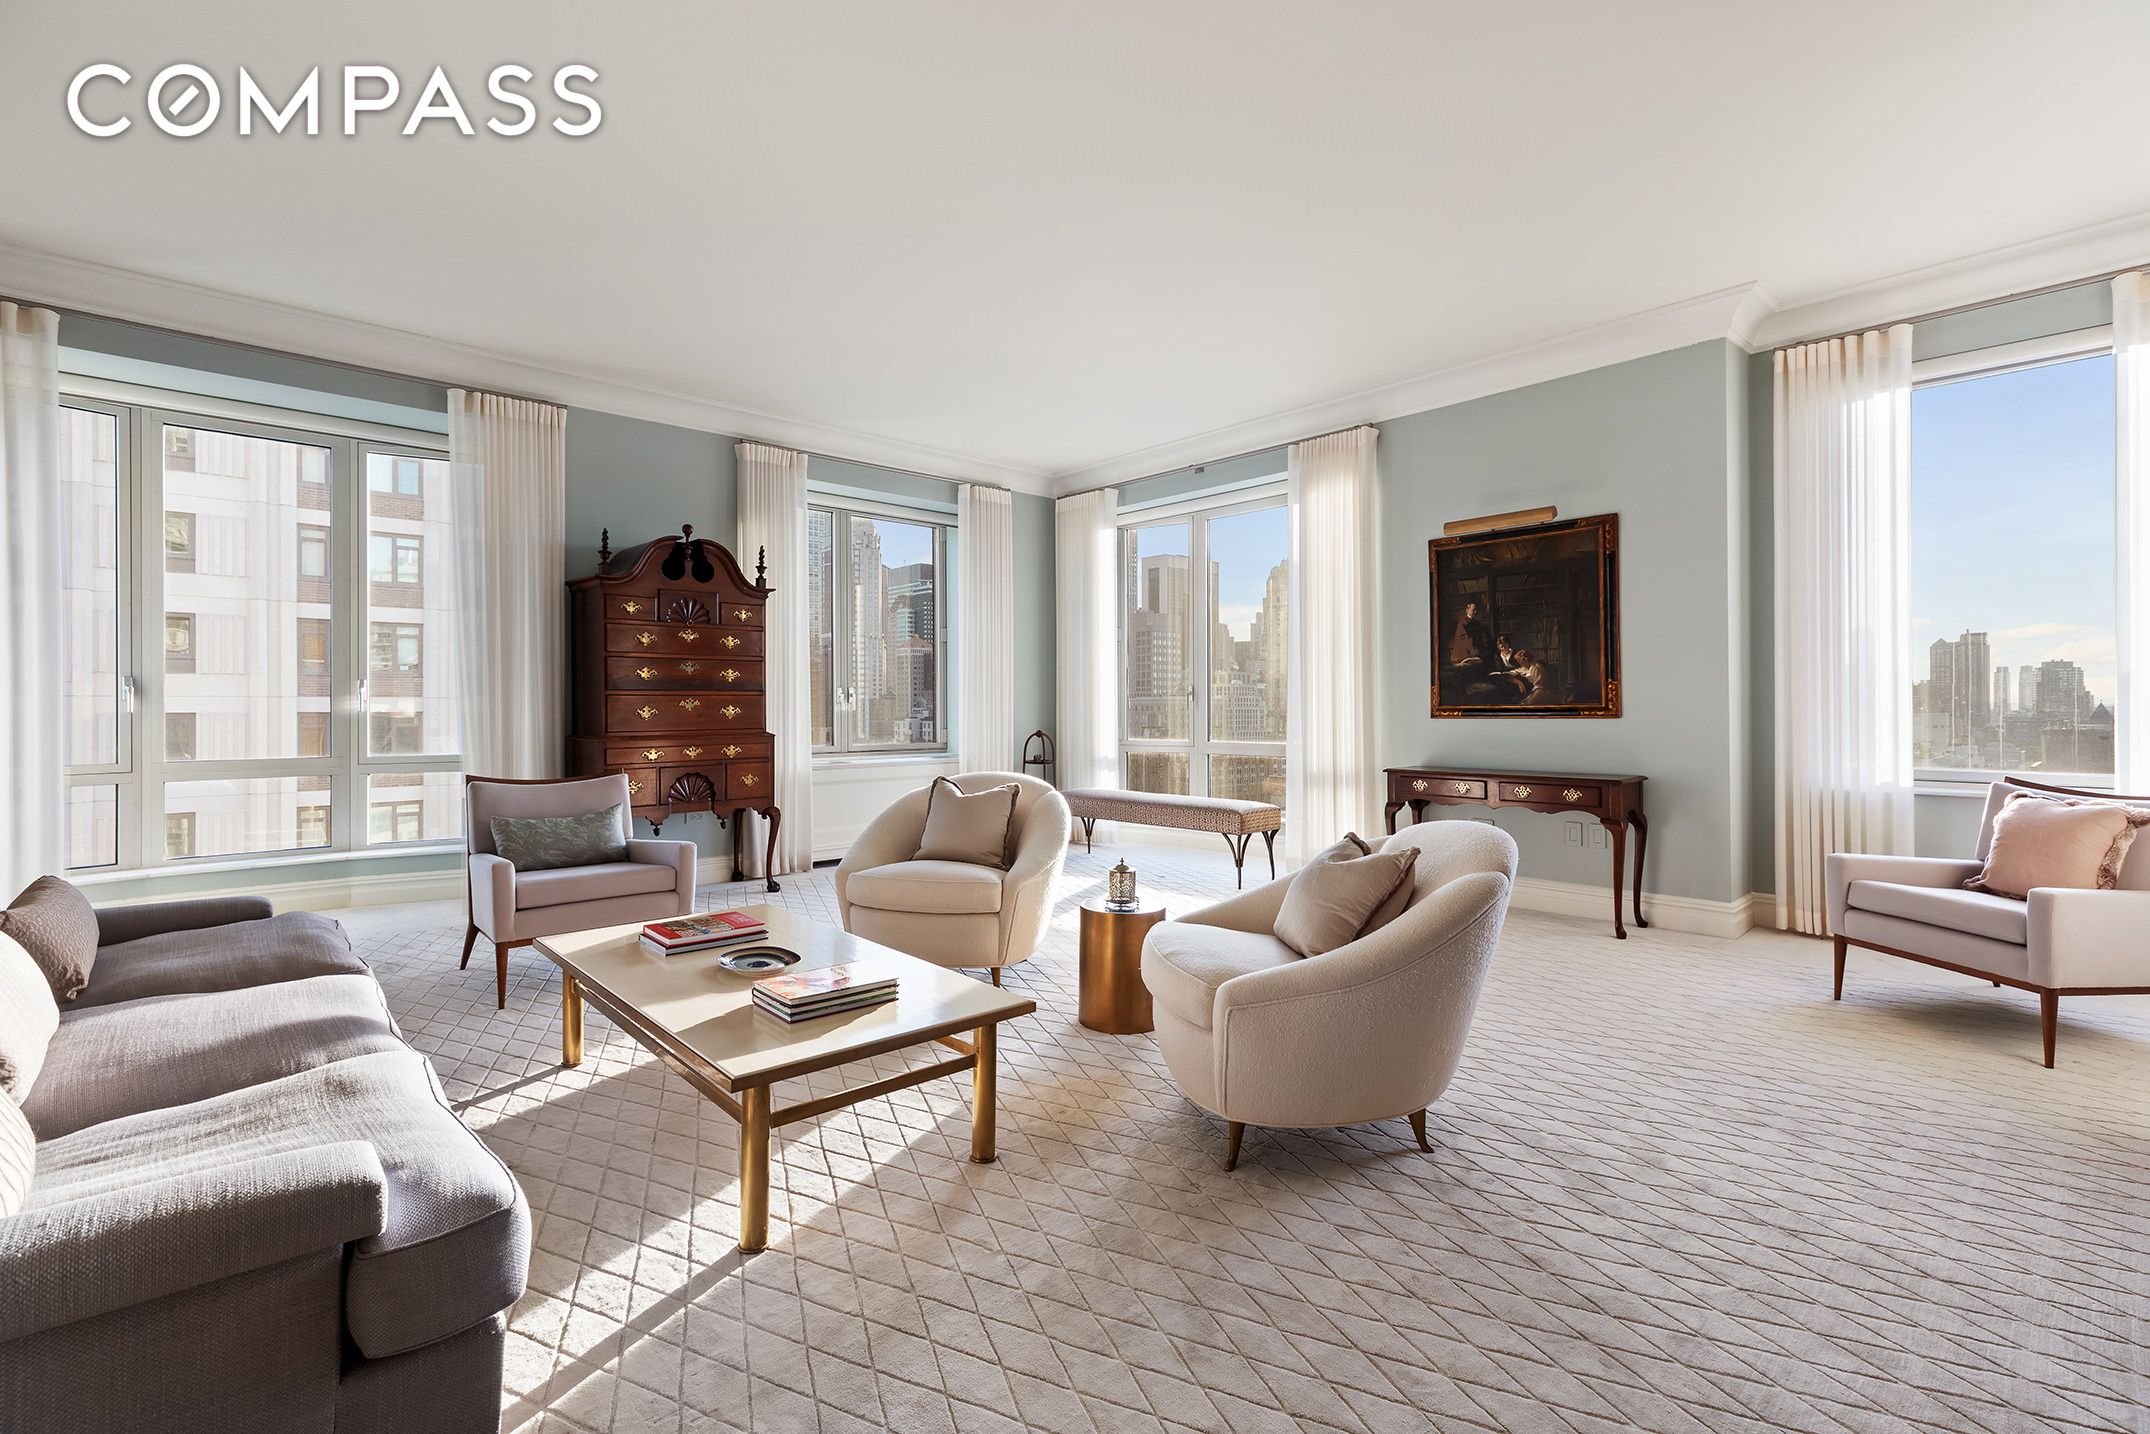 181 East 65th Street 19A, Upper East Side, Upper East Side, NYC - 3 Bedrooms  
3.5 Bathrooms  
6 Rooms - 